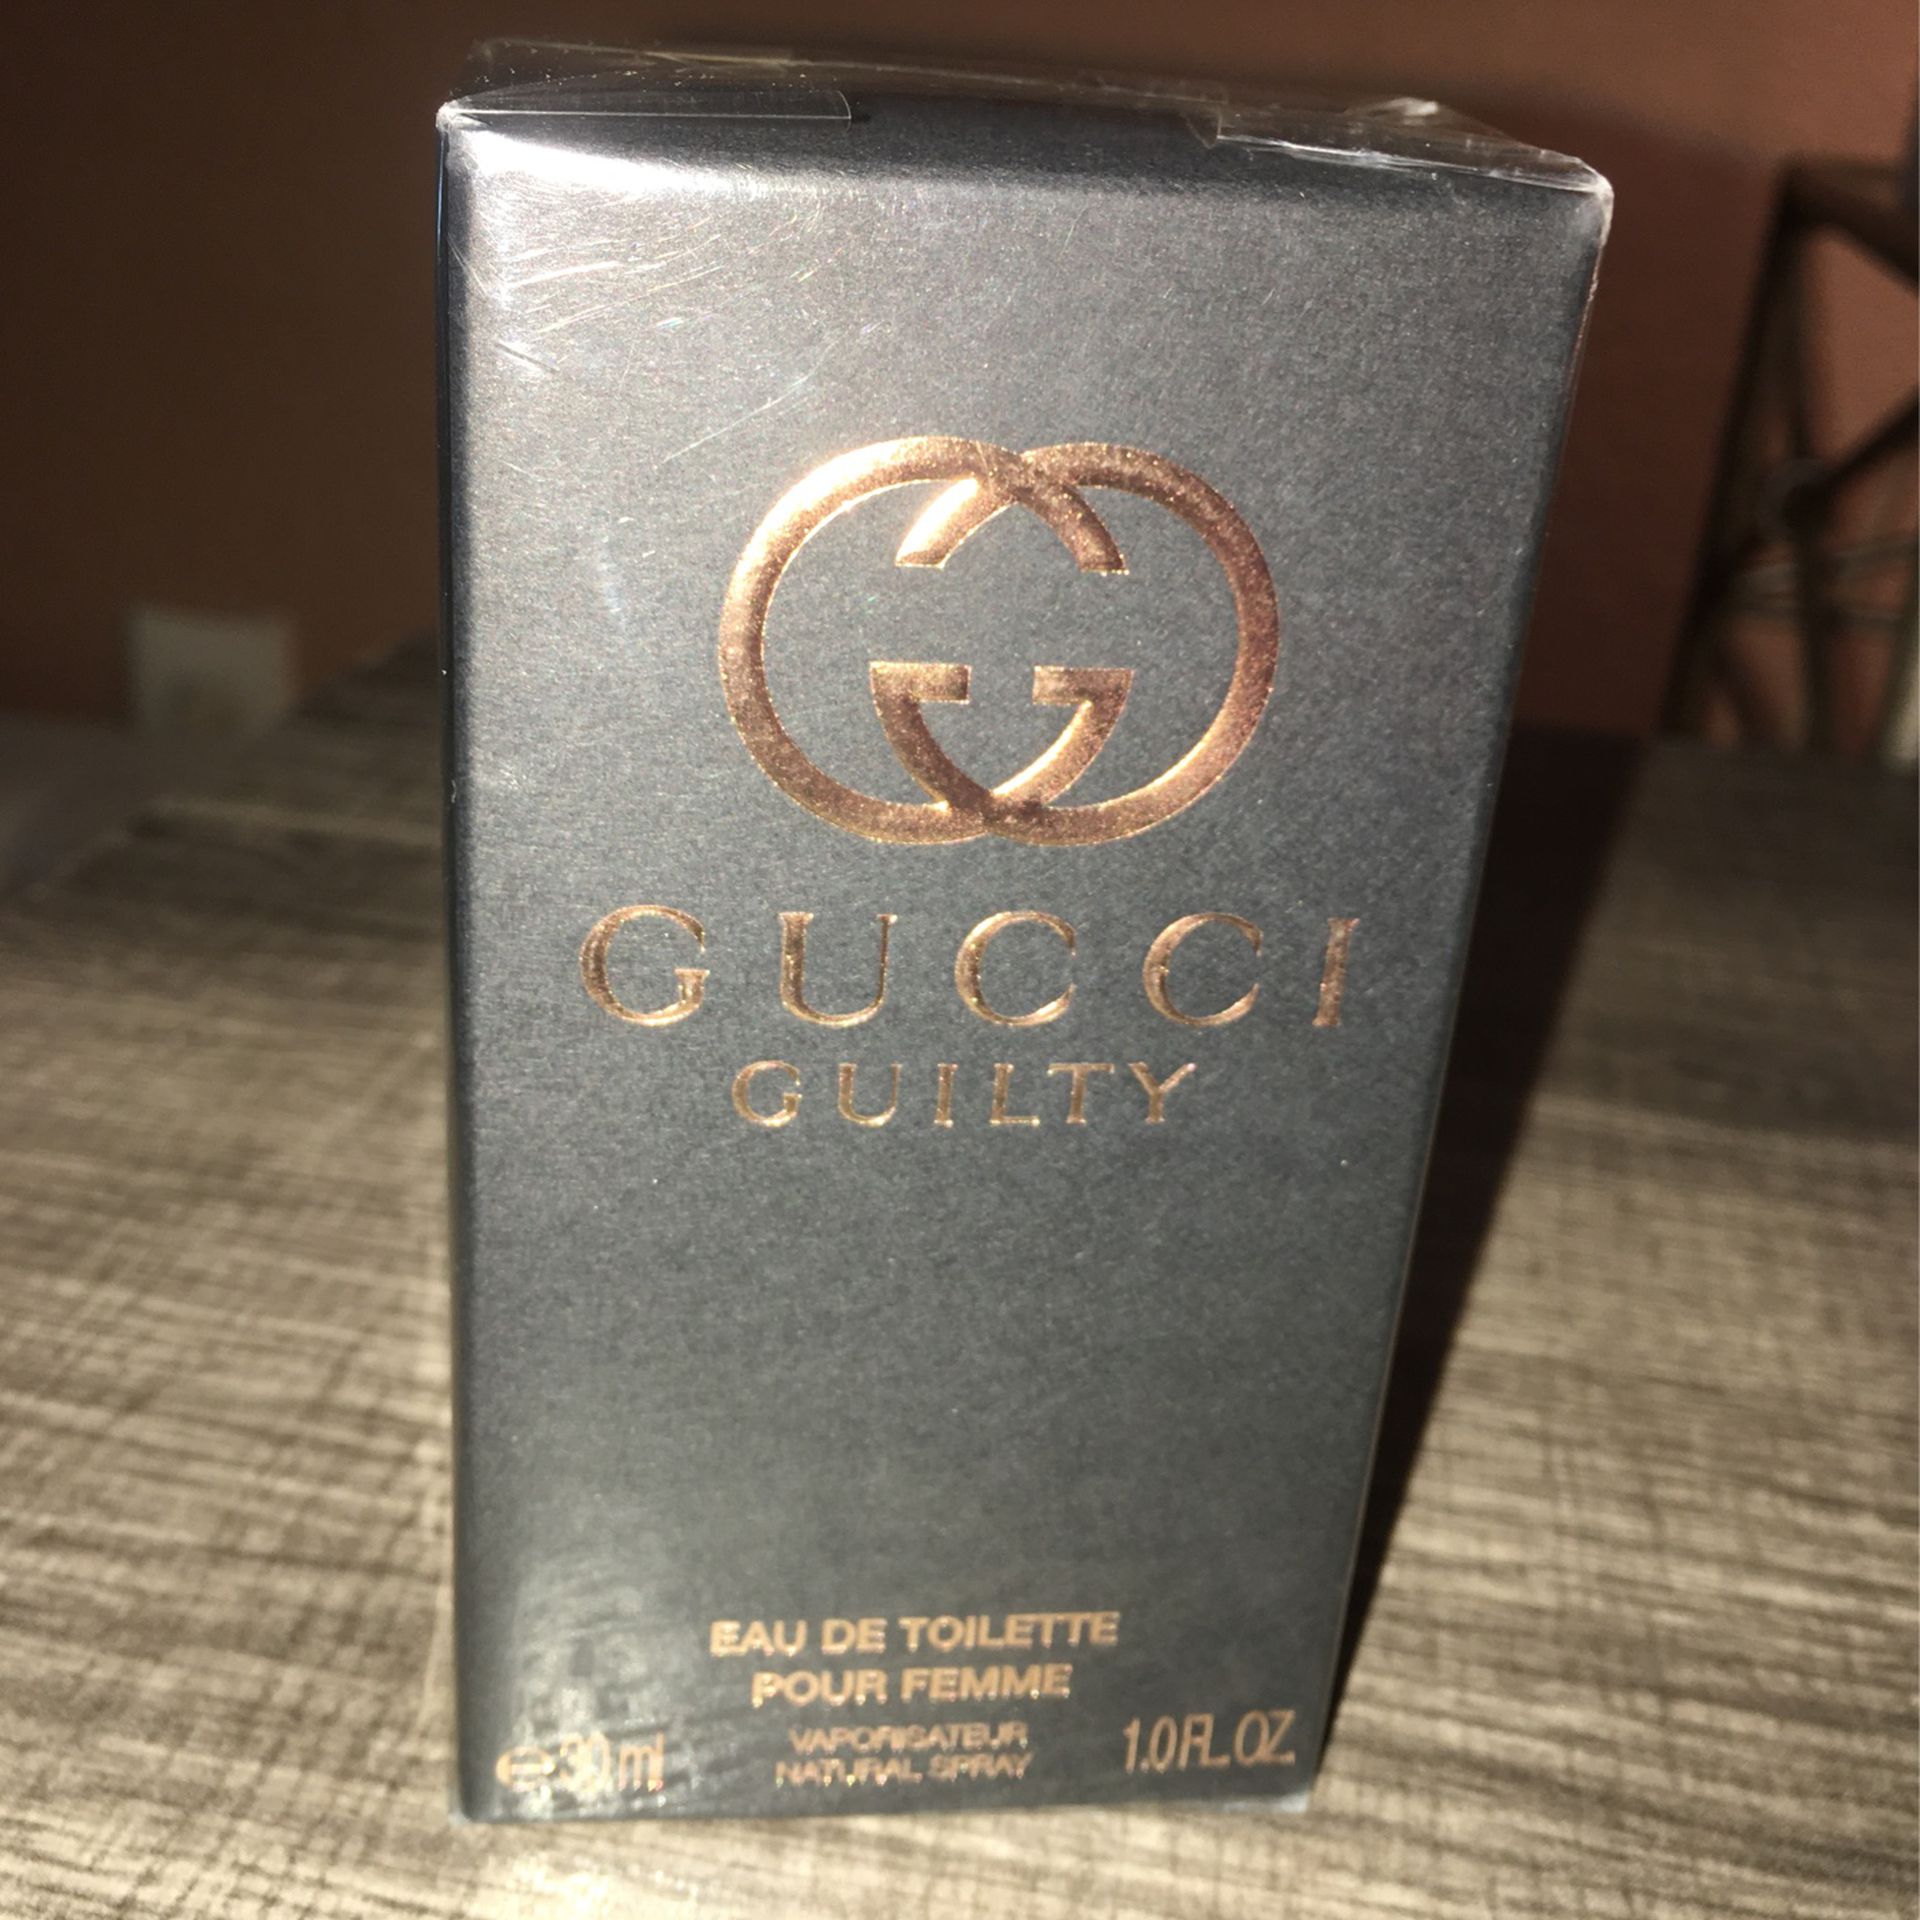 Gucci Guilty Authentic 30 Ml Eau De Toilet Perfume Spray Sealed Box $50  Firm C My Over 100 Items Ty for Sale in Fort Pierce, FL - OfferUp